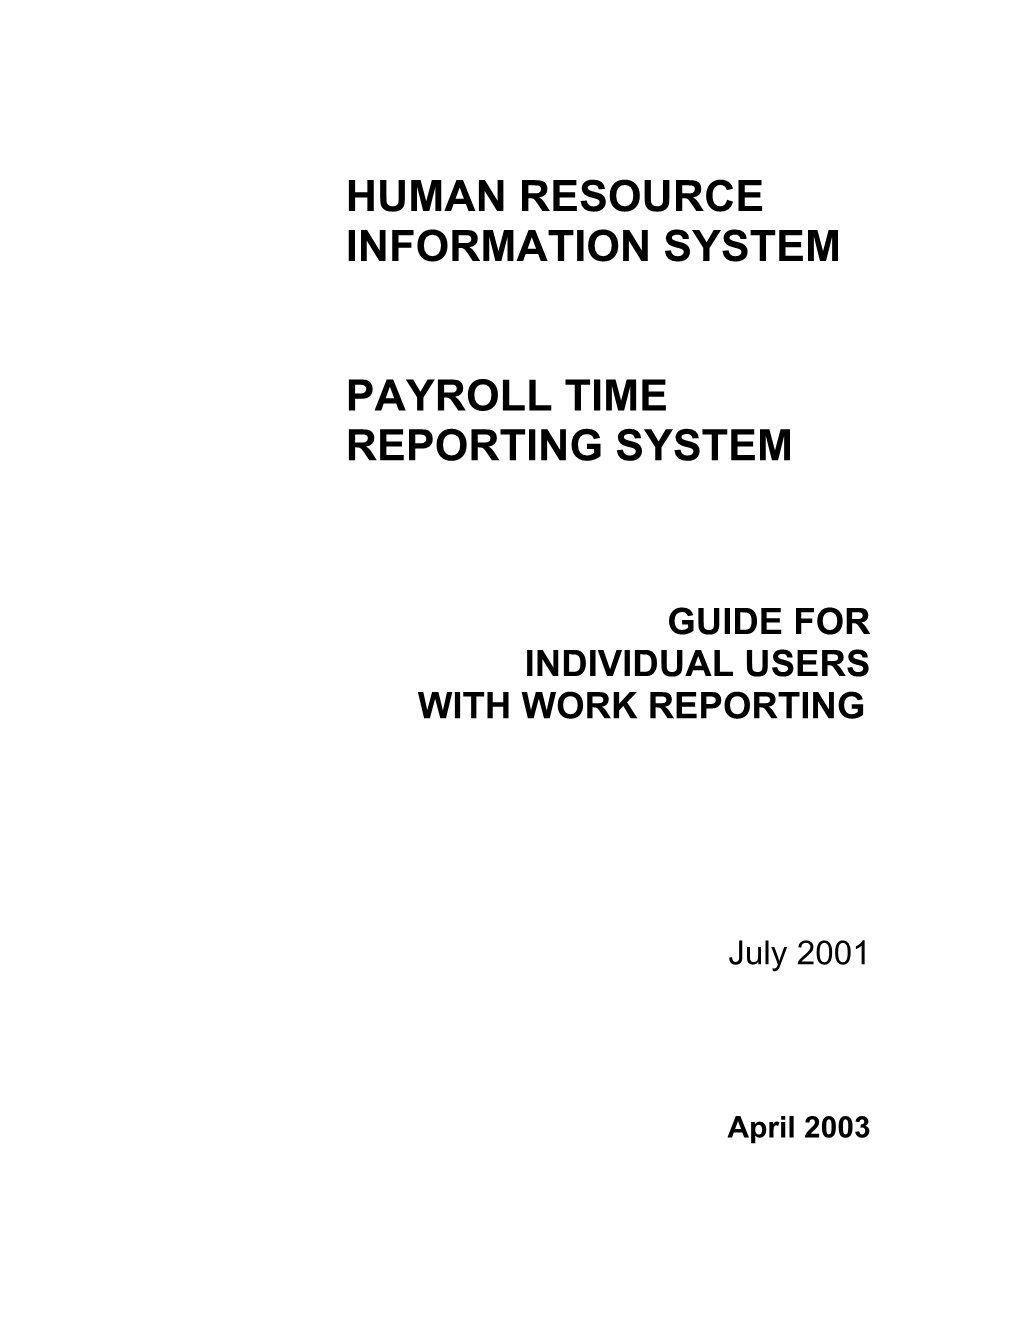 Payroll Time Reporting System